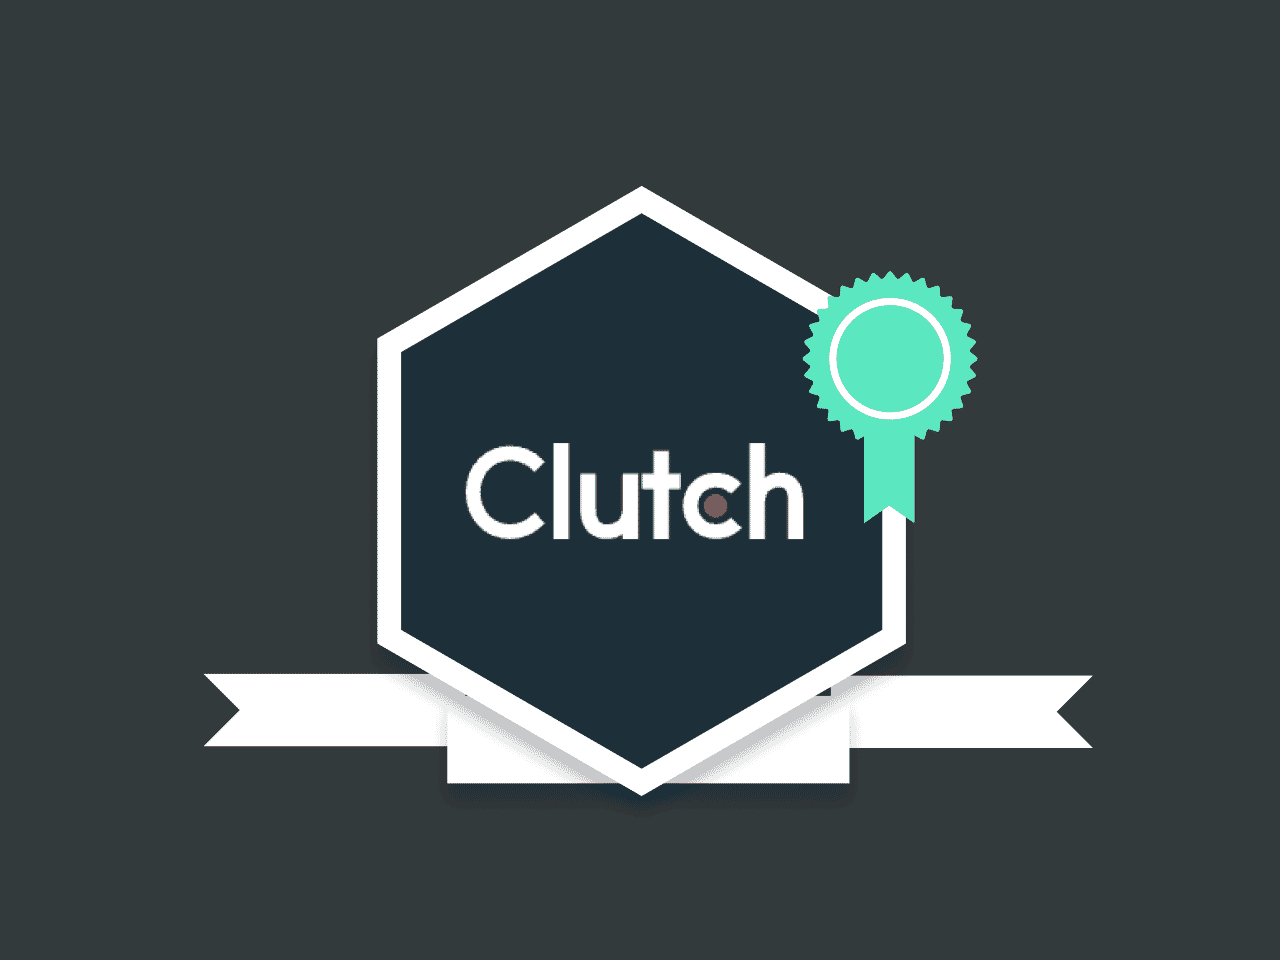 Top UX Designers recognised by Clutch for 2021